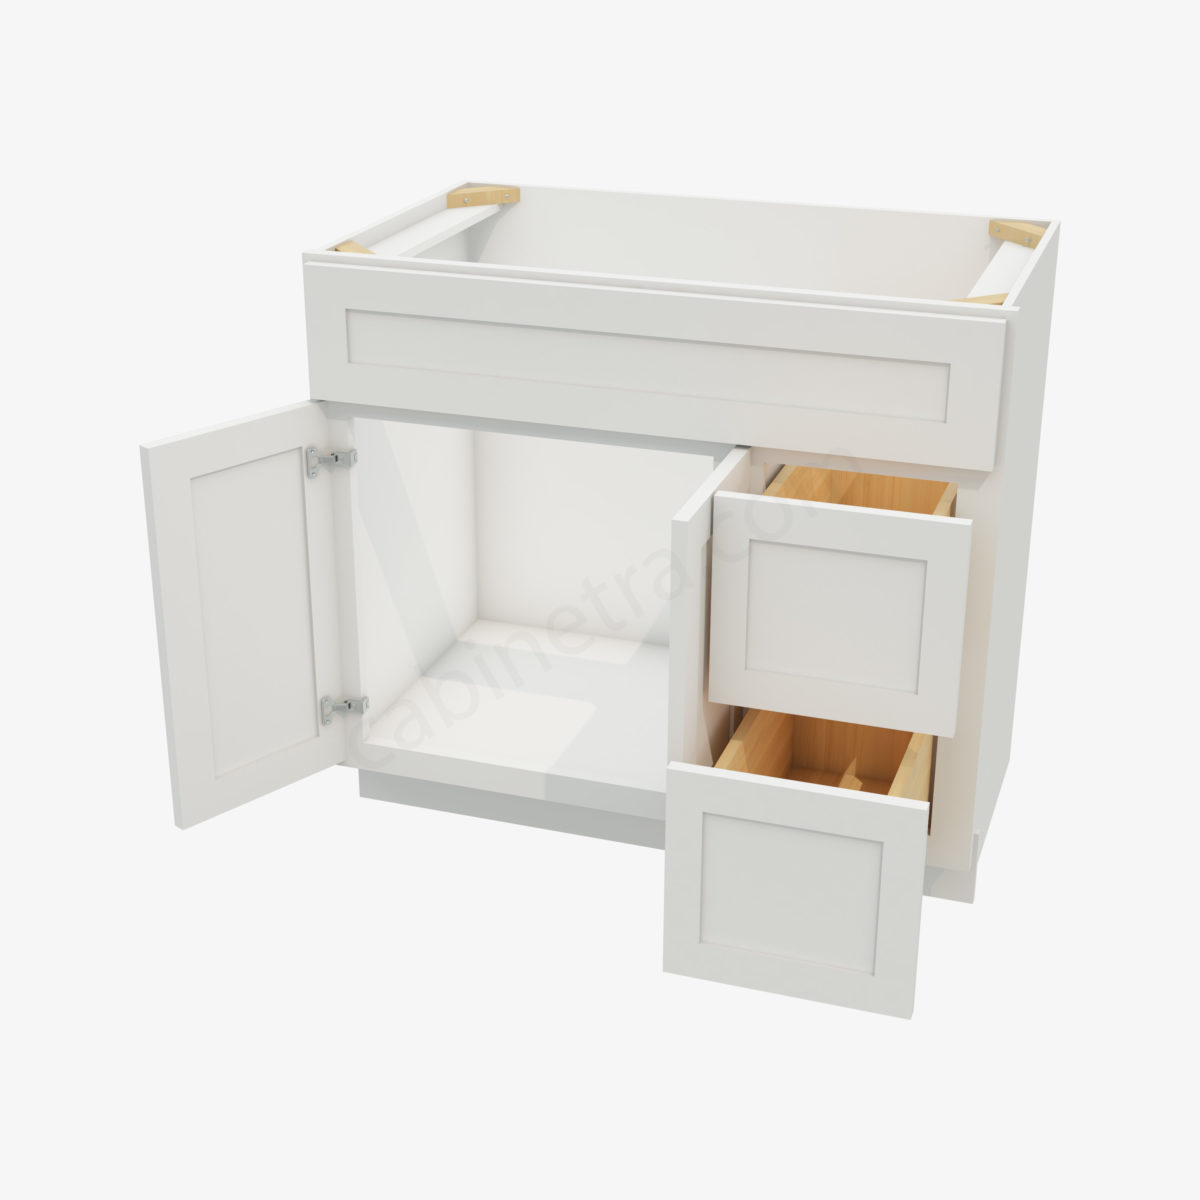 AW S3621BDR 34 5 Forevermark Ice White Shaker Cabinetra scaled